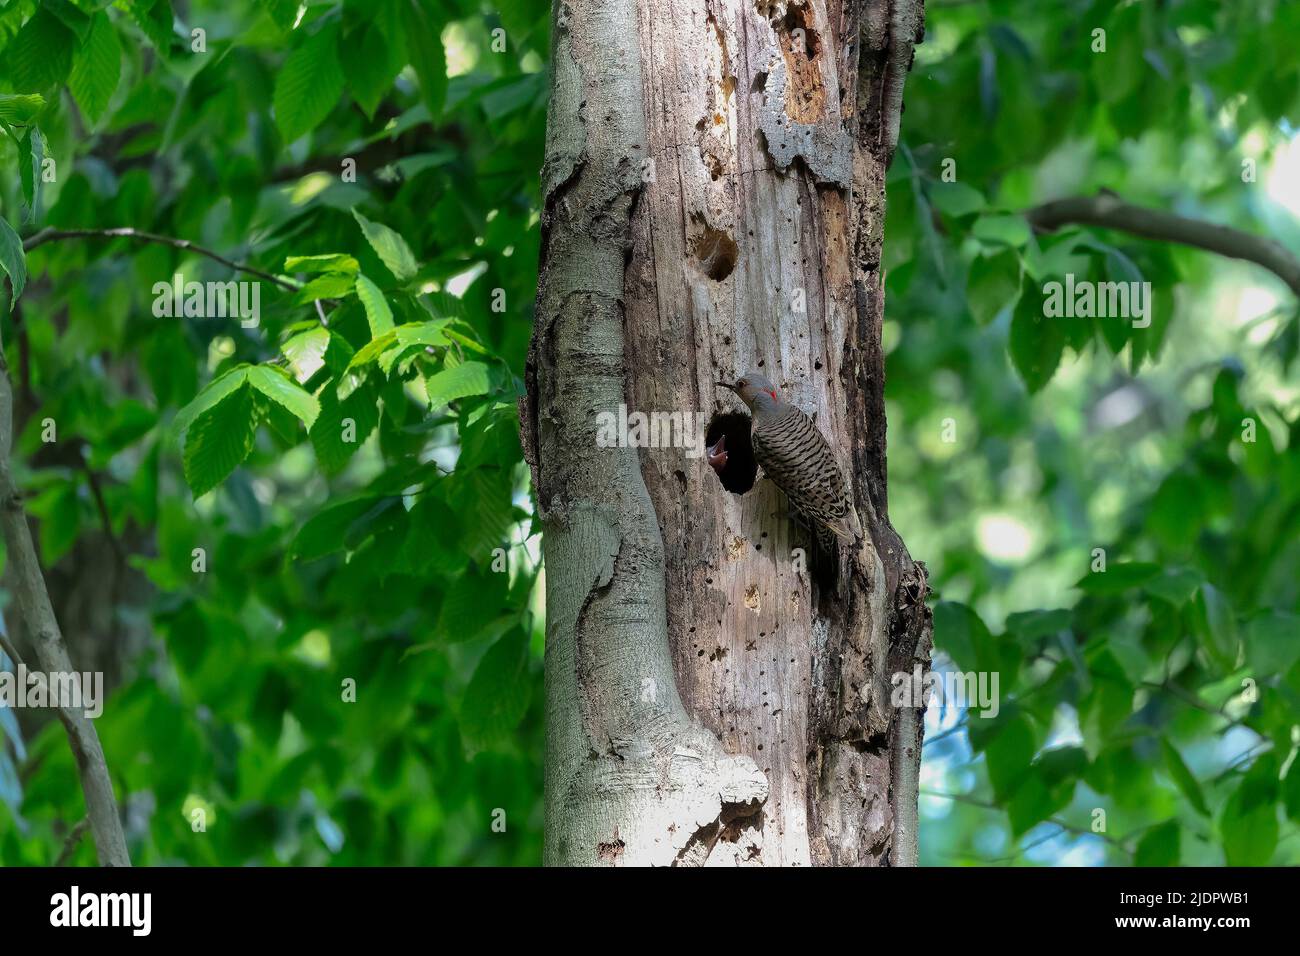 The Northern flicker (Colaptes auratus) nesting in Wisconsin. North American bird. Stock Photo